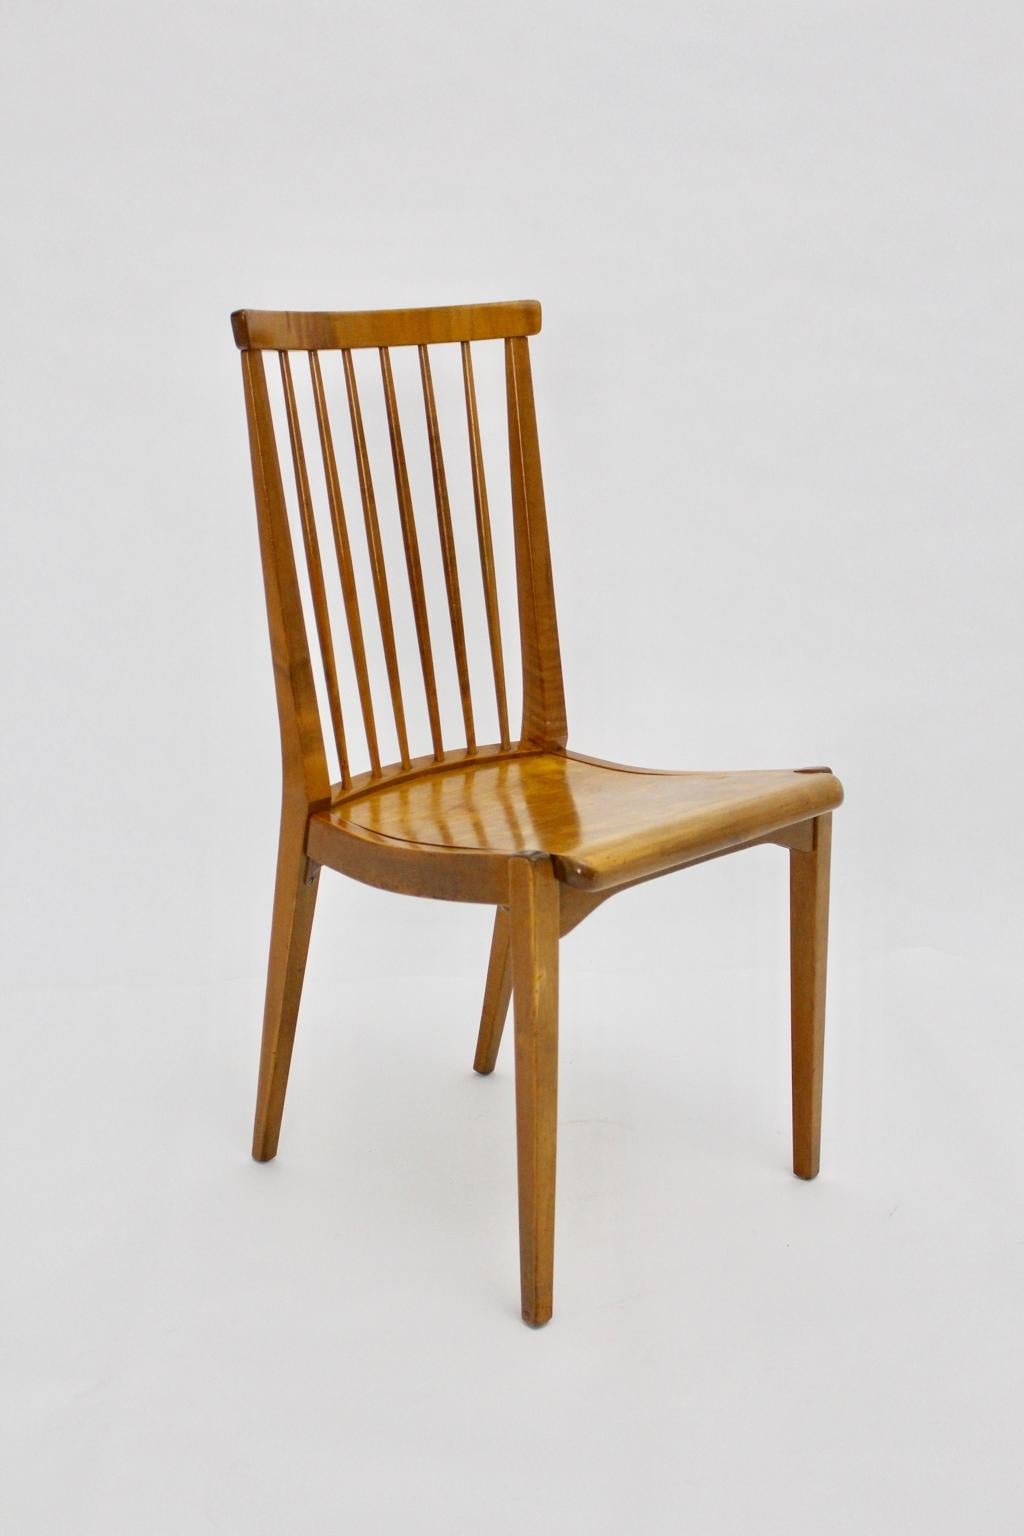 Austrian Brown Mid-Century Modern Maple Tree Chair by Otto Niedermoser for Thonet For Sale